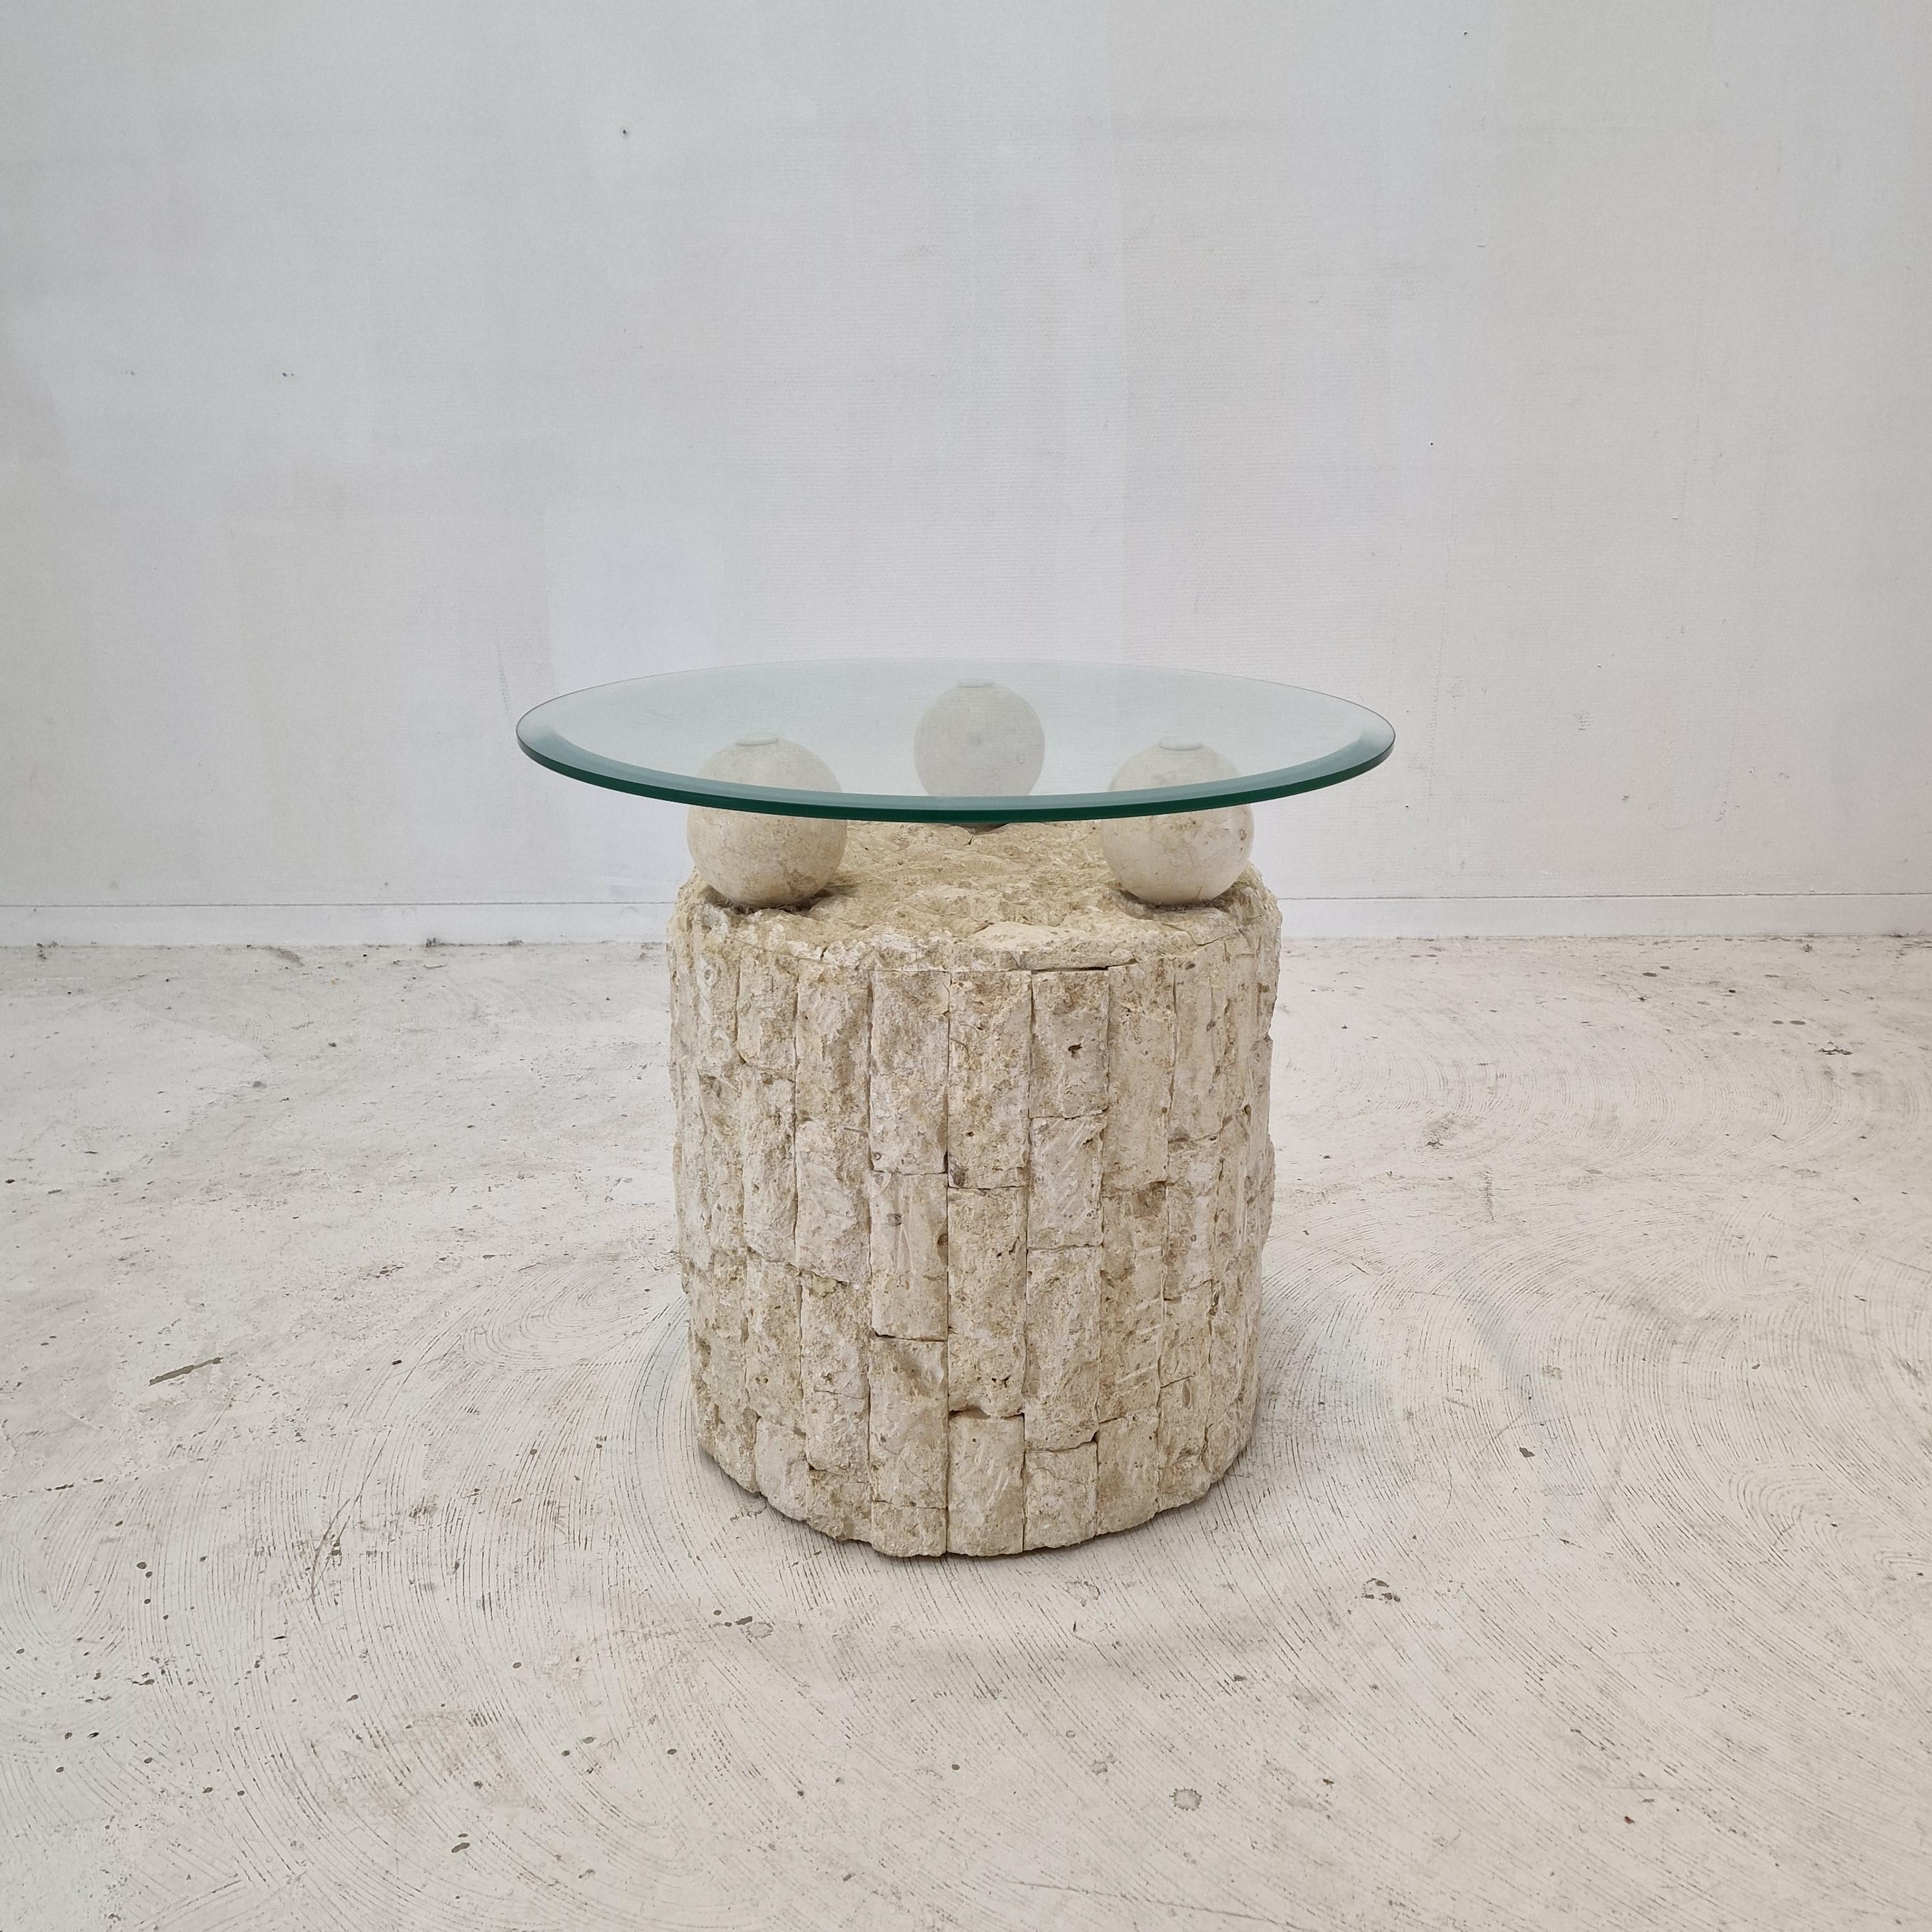 Lovely Postmodern 1980s design, coffee or side table by Magnussen Ponte.

The base of this cute table is made of rough edged brick motif Mactan stone or Fossil Stone. 

Three stone balls holding the removable circular facet cut glass plate.
The